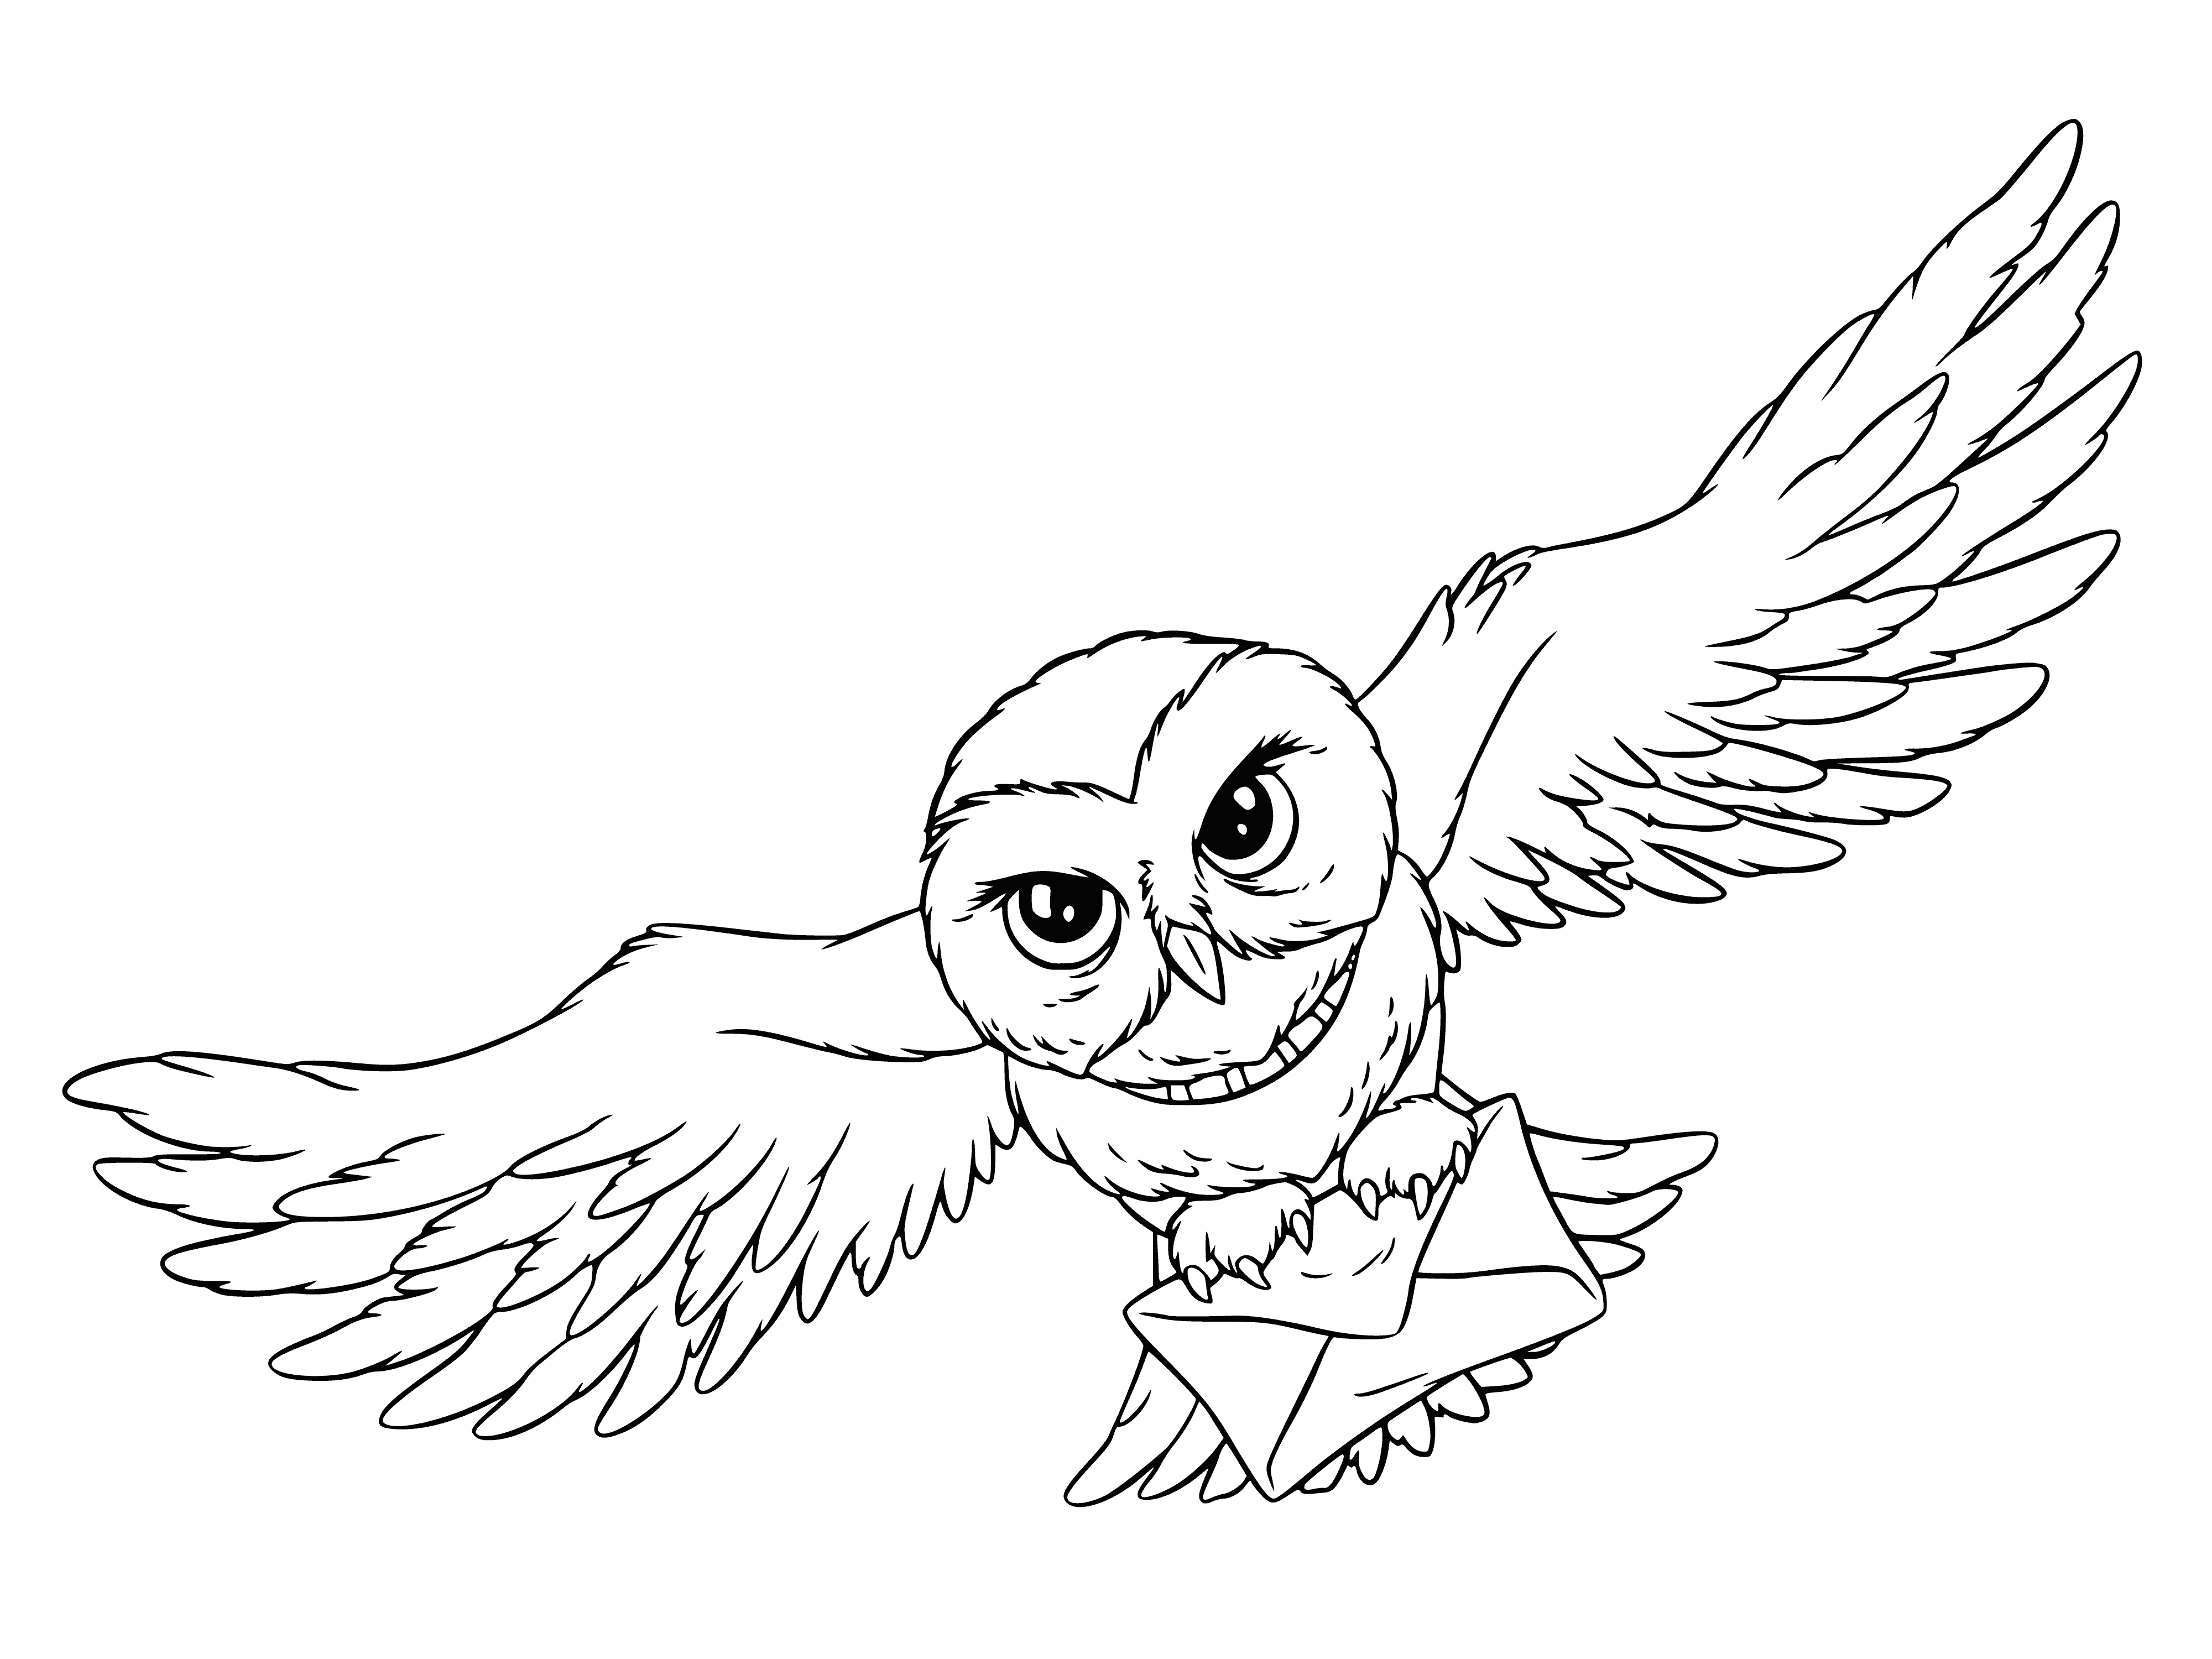 coloring page: Harry Potter gets a letter from Hogwarts, sealed w/ a Hogwarts crest wax seal! He's surely excited to learn more.